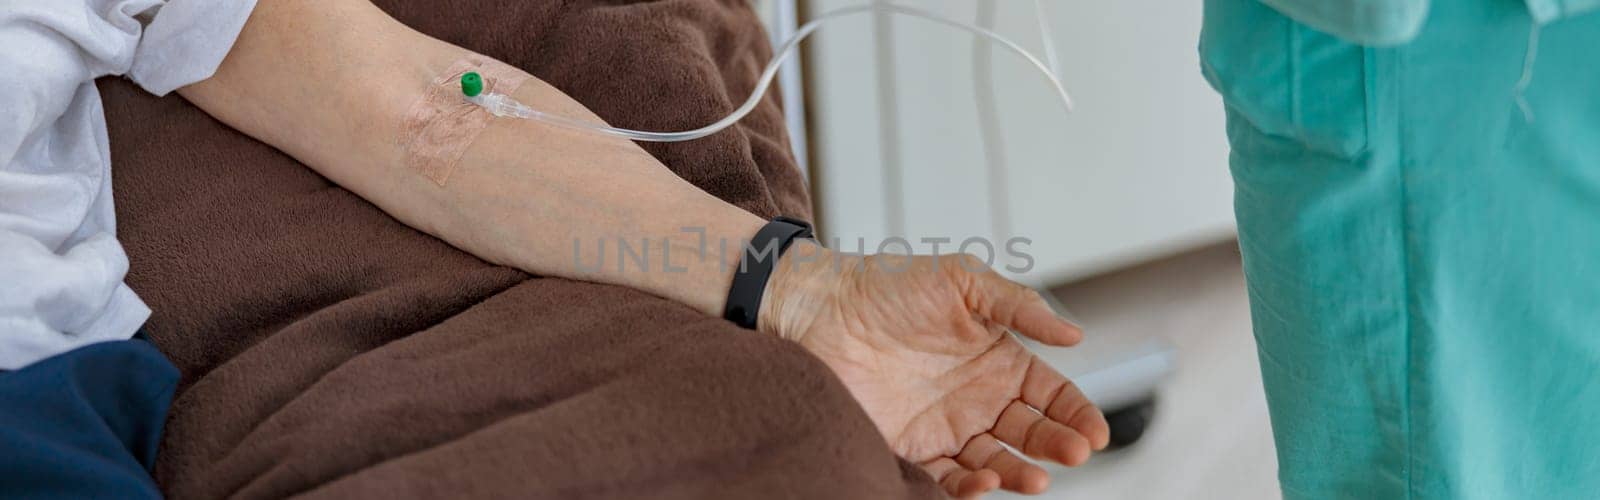 Nurse putting a drip in the arm of her patient in modern medical clinic. High quality photo